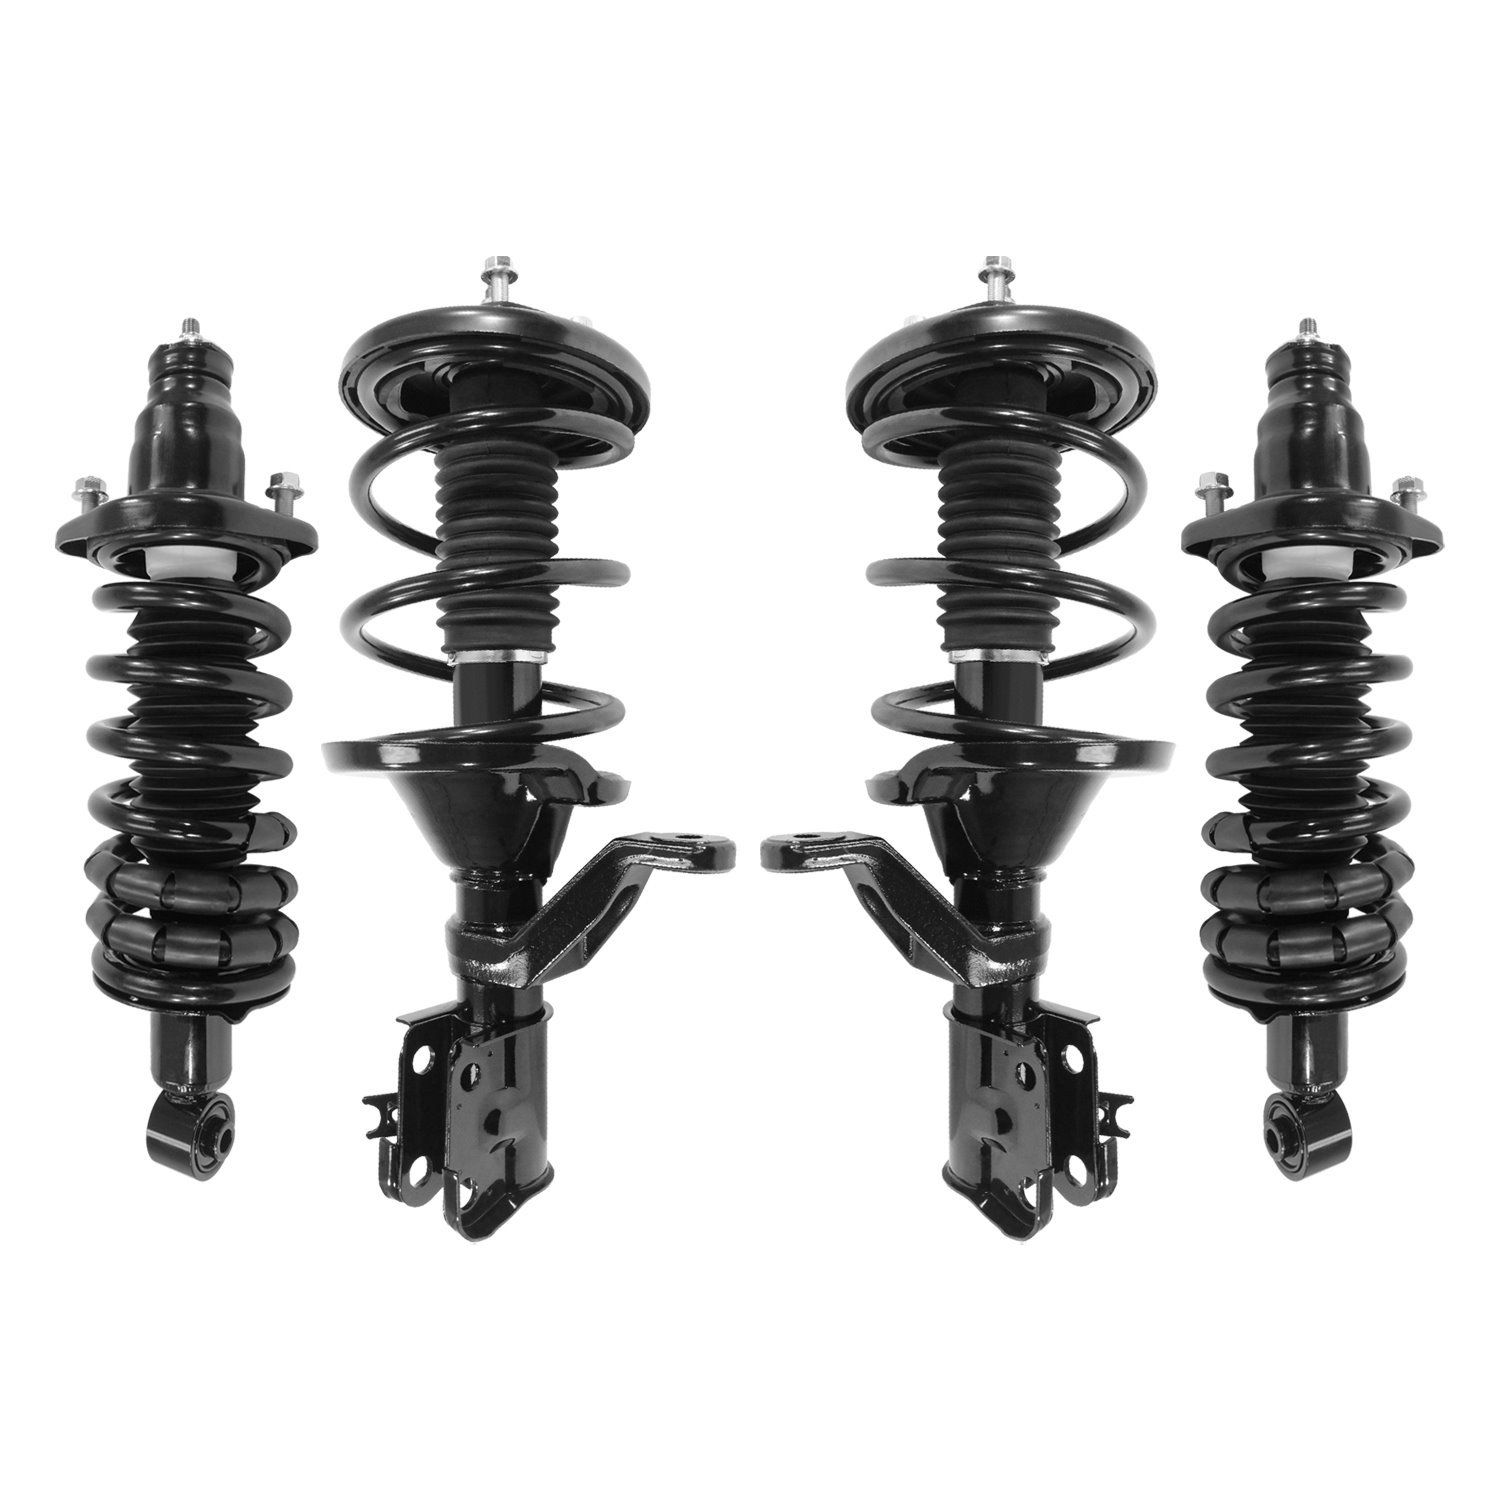 4-13051-16011-001 Front & Rear Suspension Strut & Coil Spring Assembly Kit Fits Select Acura RSX